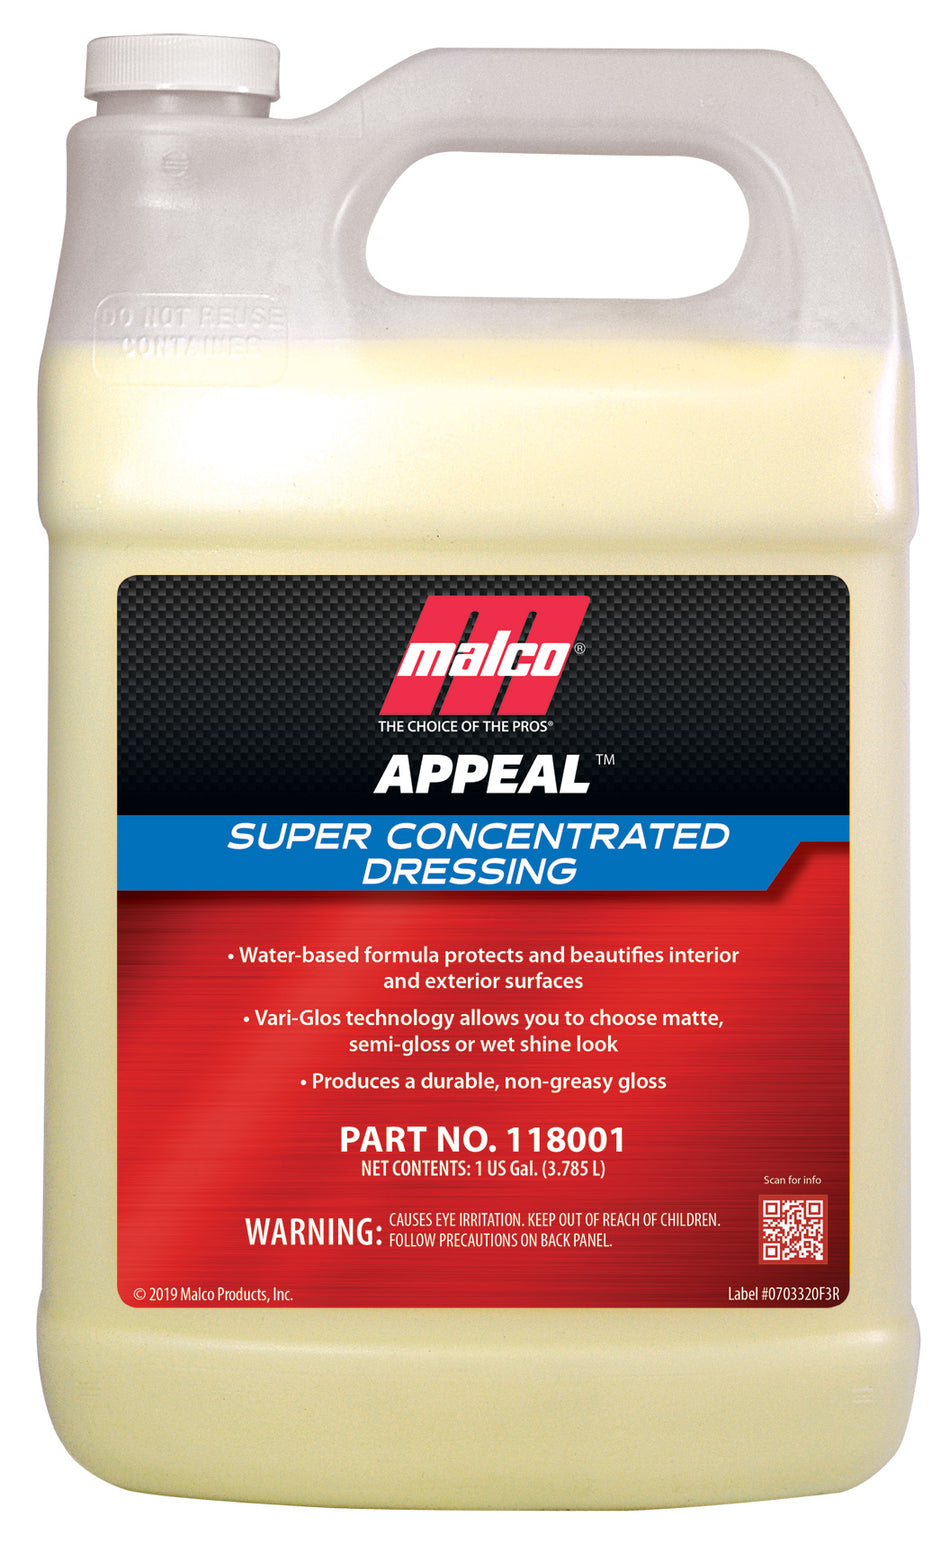 Malco Appeal Super Concentrated Dressing